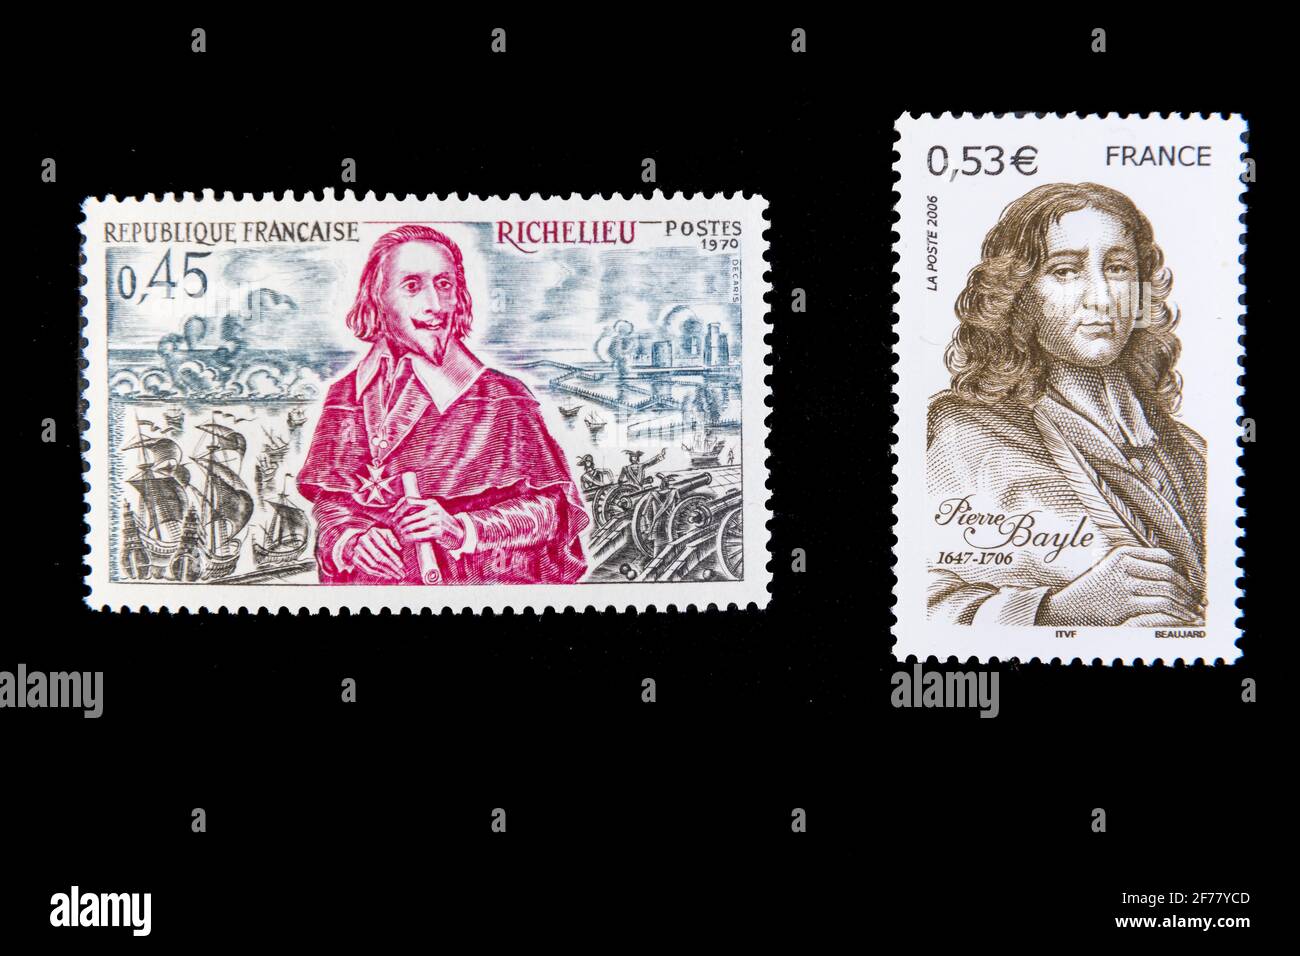 France, Paris, stamps, historical figures Stock Photo